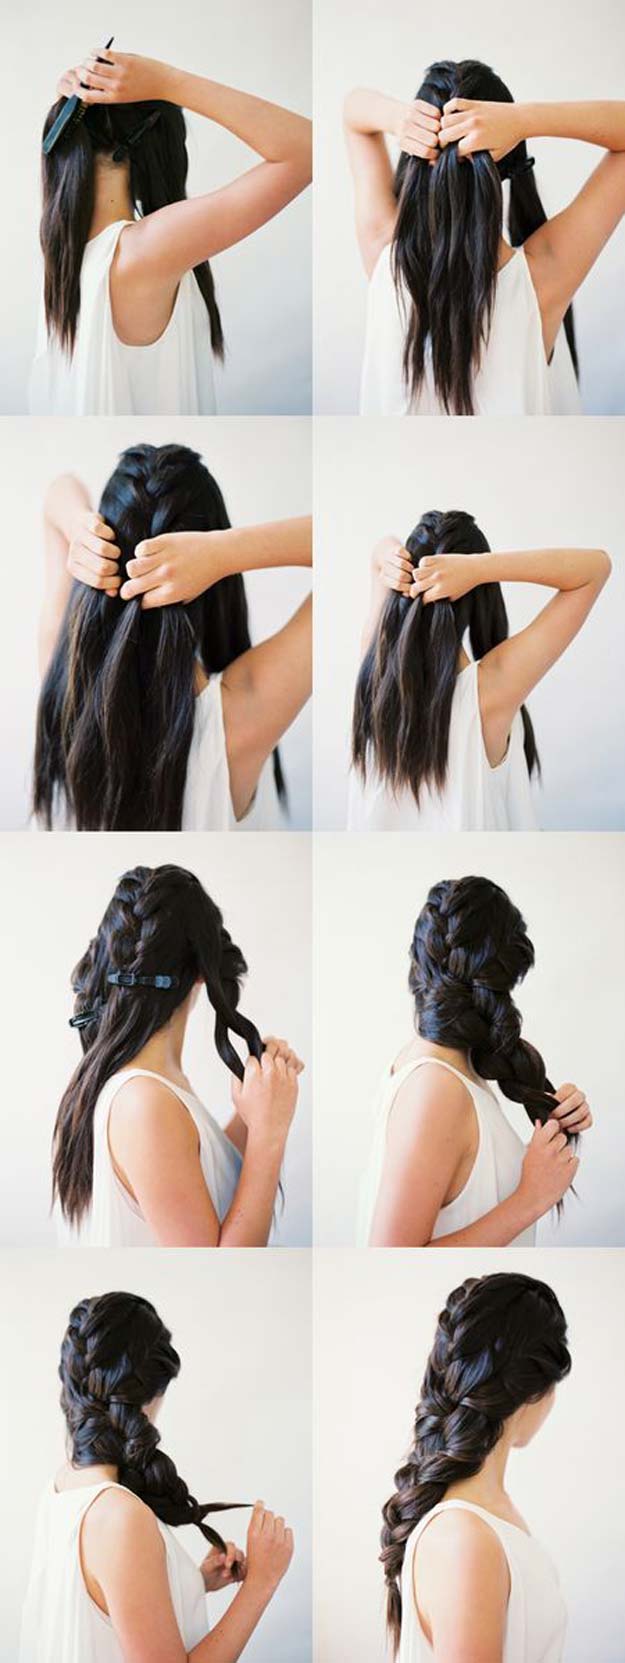 How To Braid Hair: 7 Types You Can Learn At Home